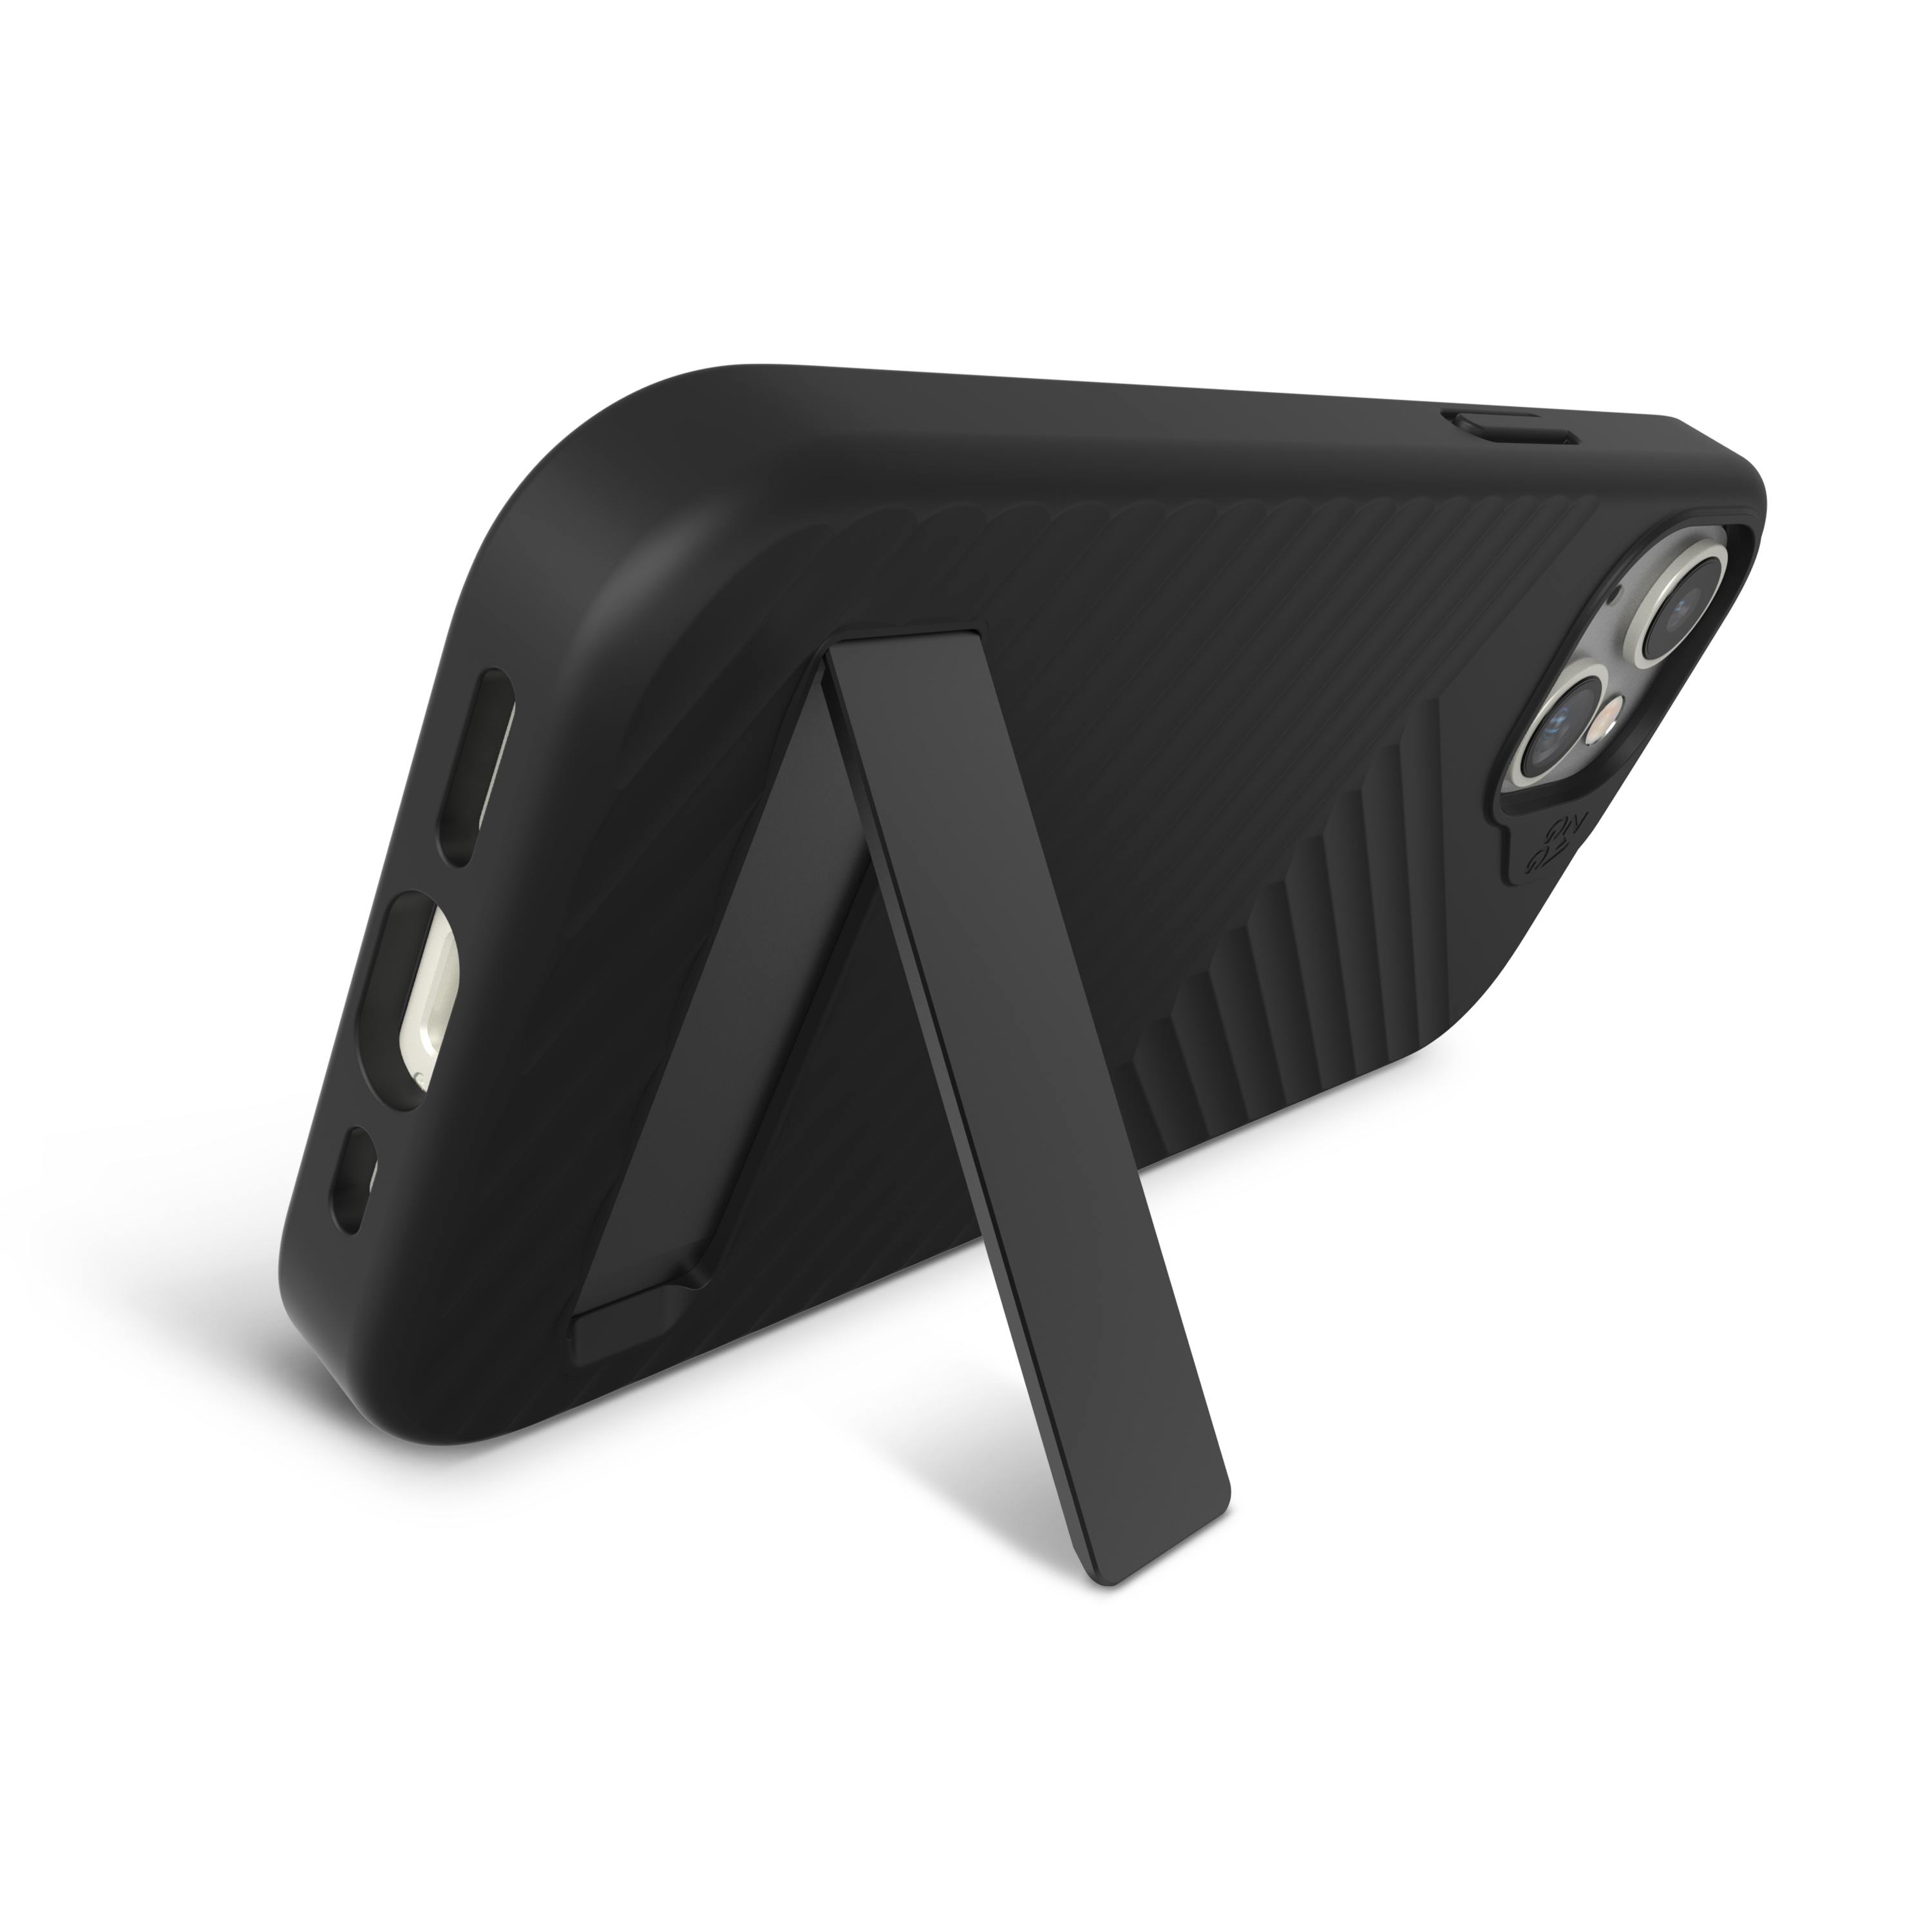 Integrated Kickstand||
The kickstand allows for hands-free viewing, and it folds back flush with the case.